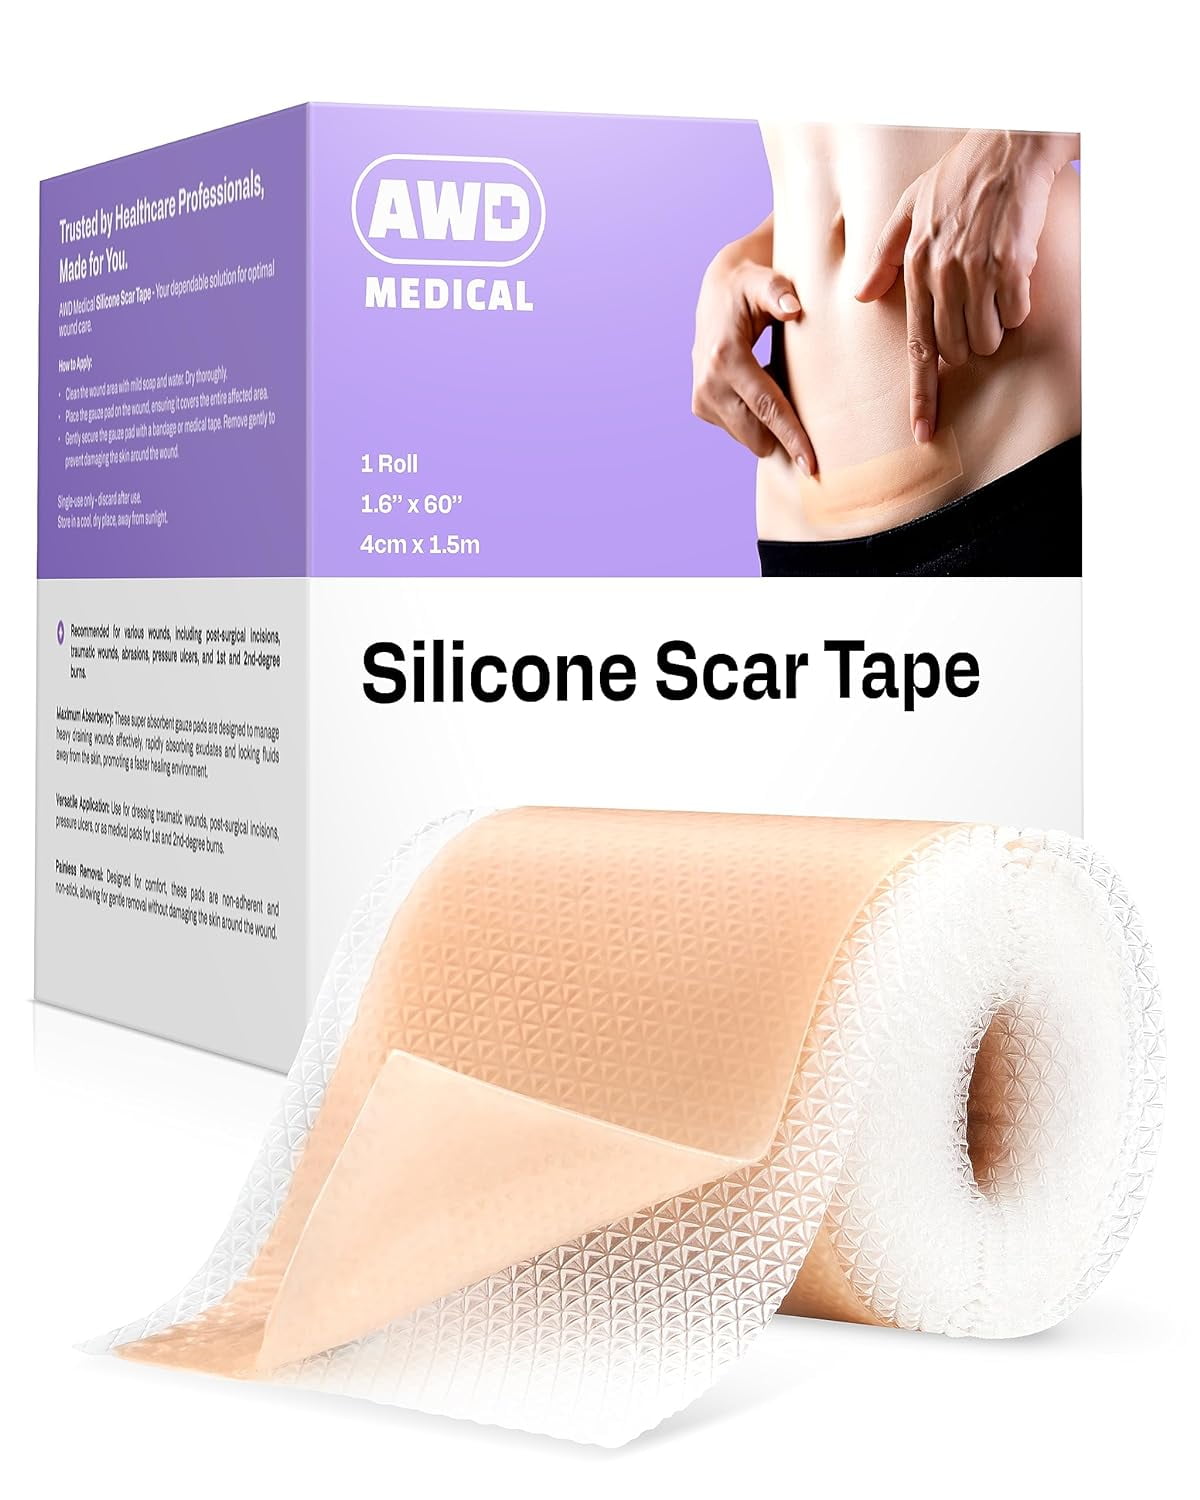 AWD Silicone Scar Tape for Surgical Scars - Medical Grade Silicone